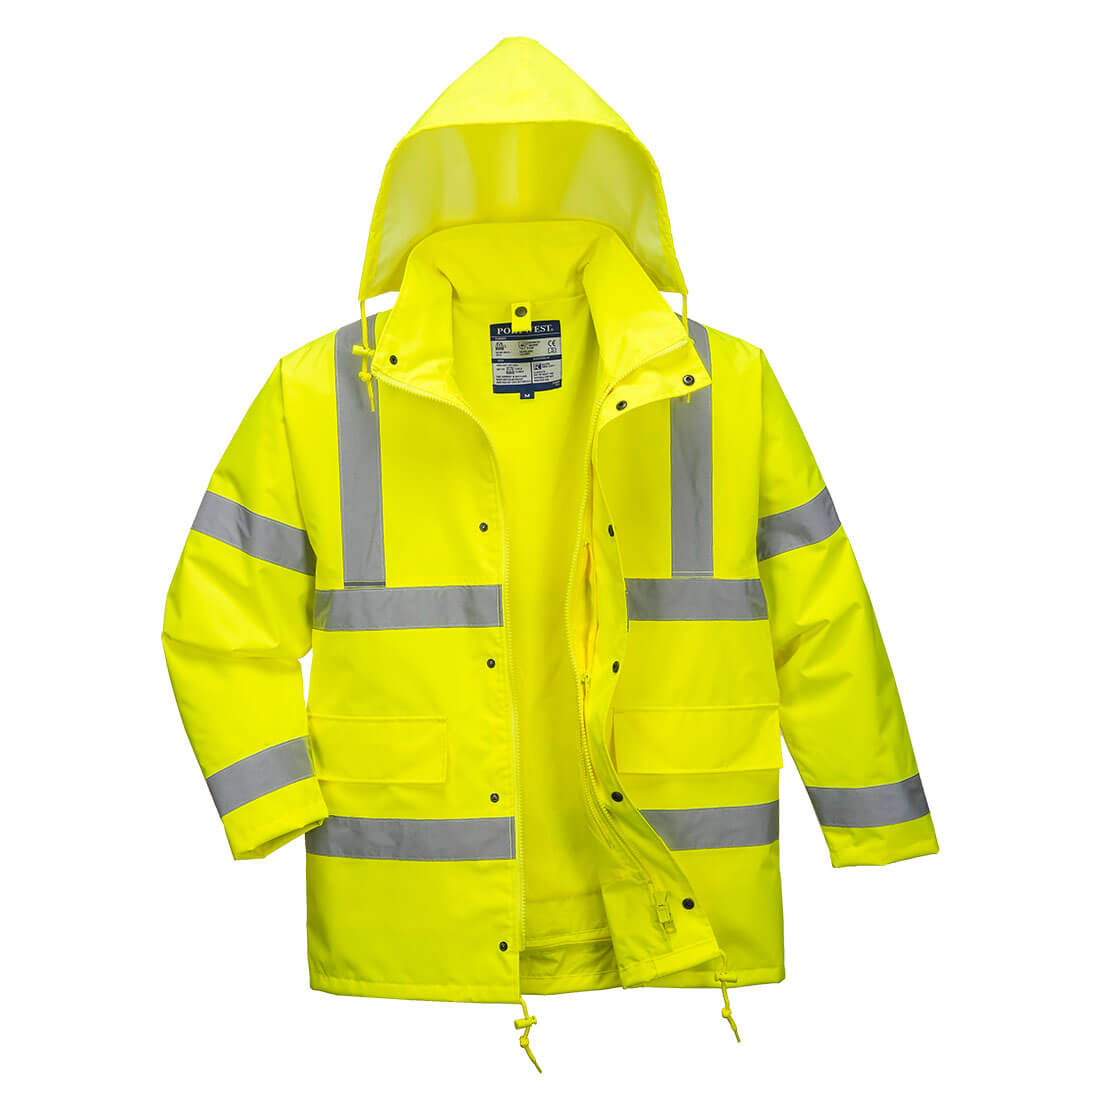 Image of Oxford Weave 300D Class 3 Hi Vis 4-in1 Traffic Jacket Yellow 2XL